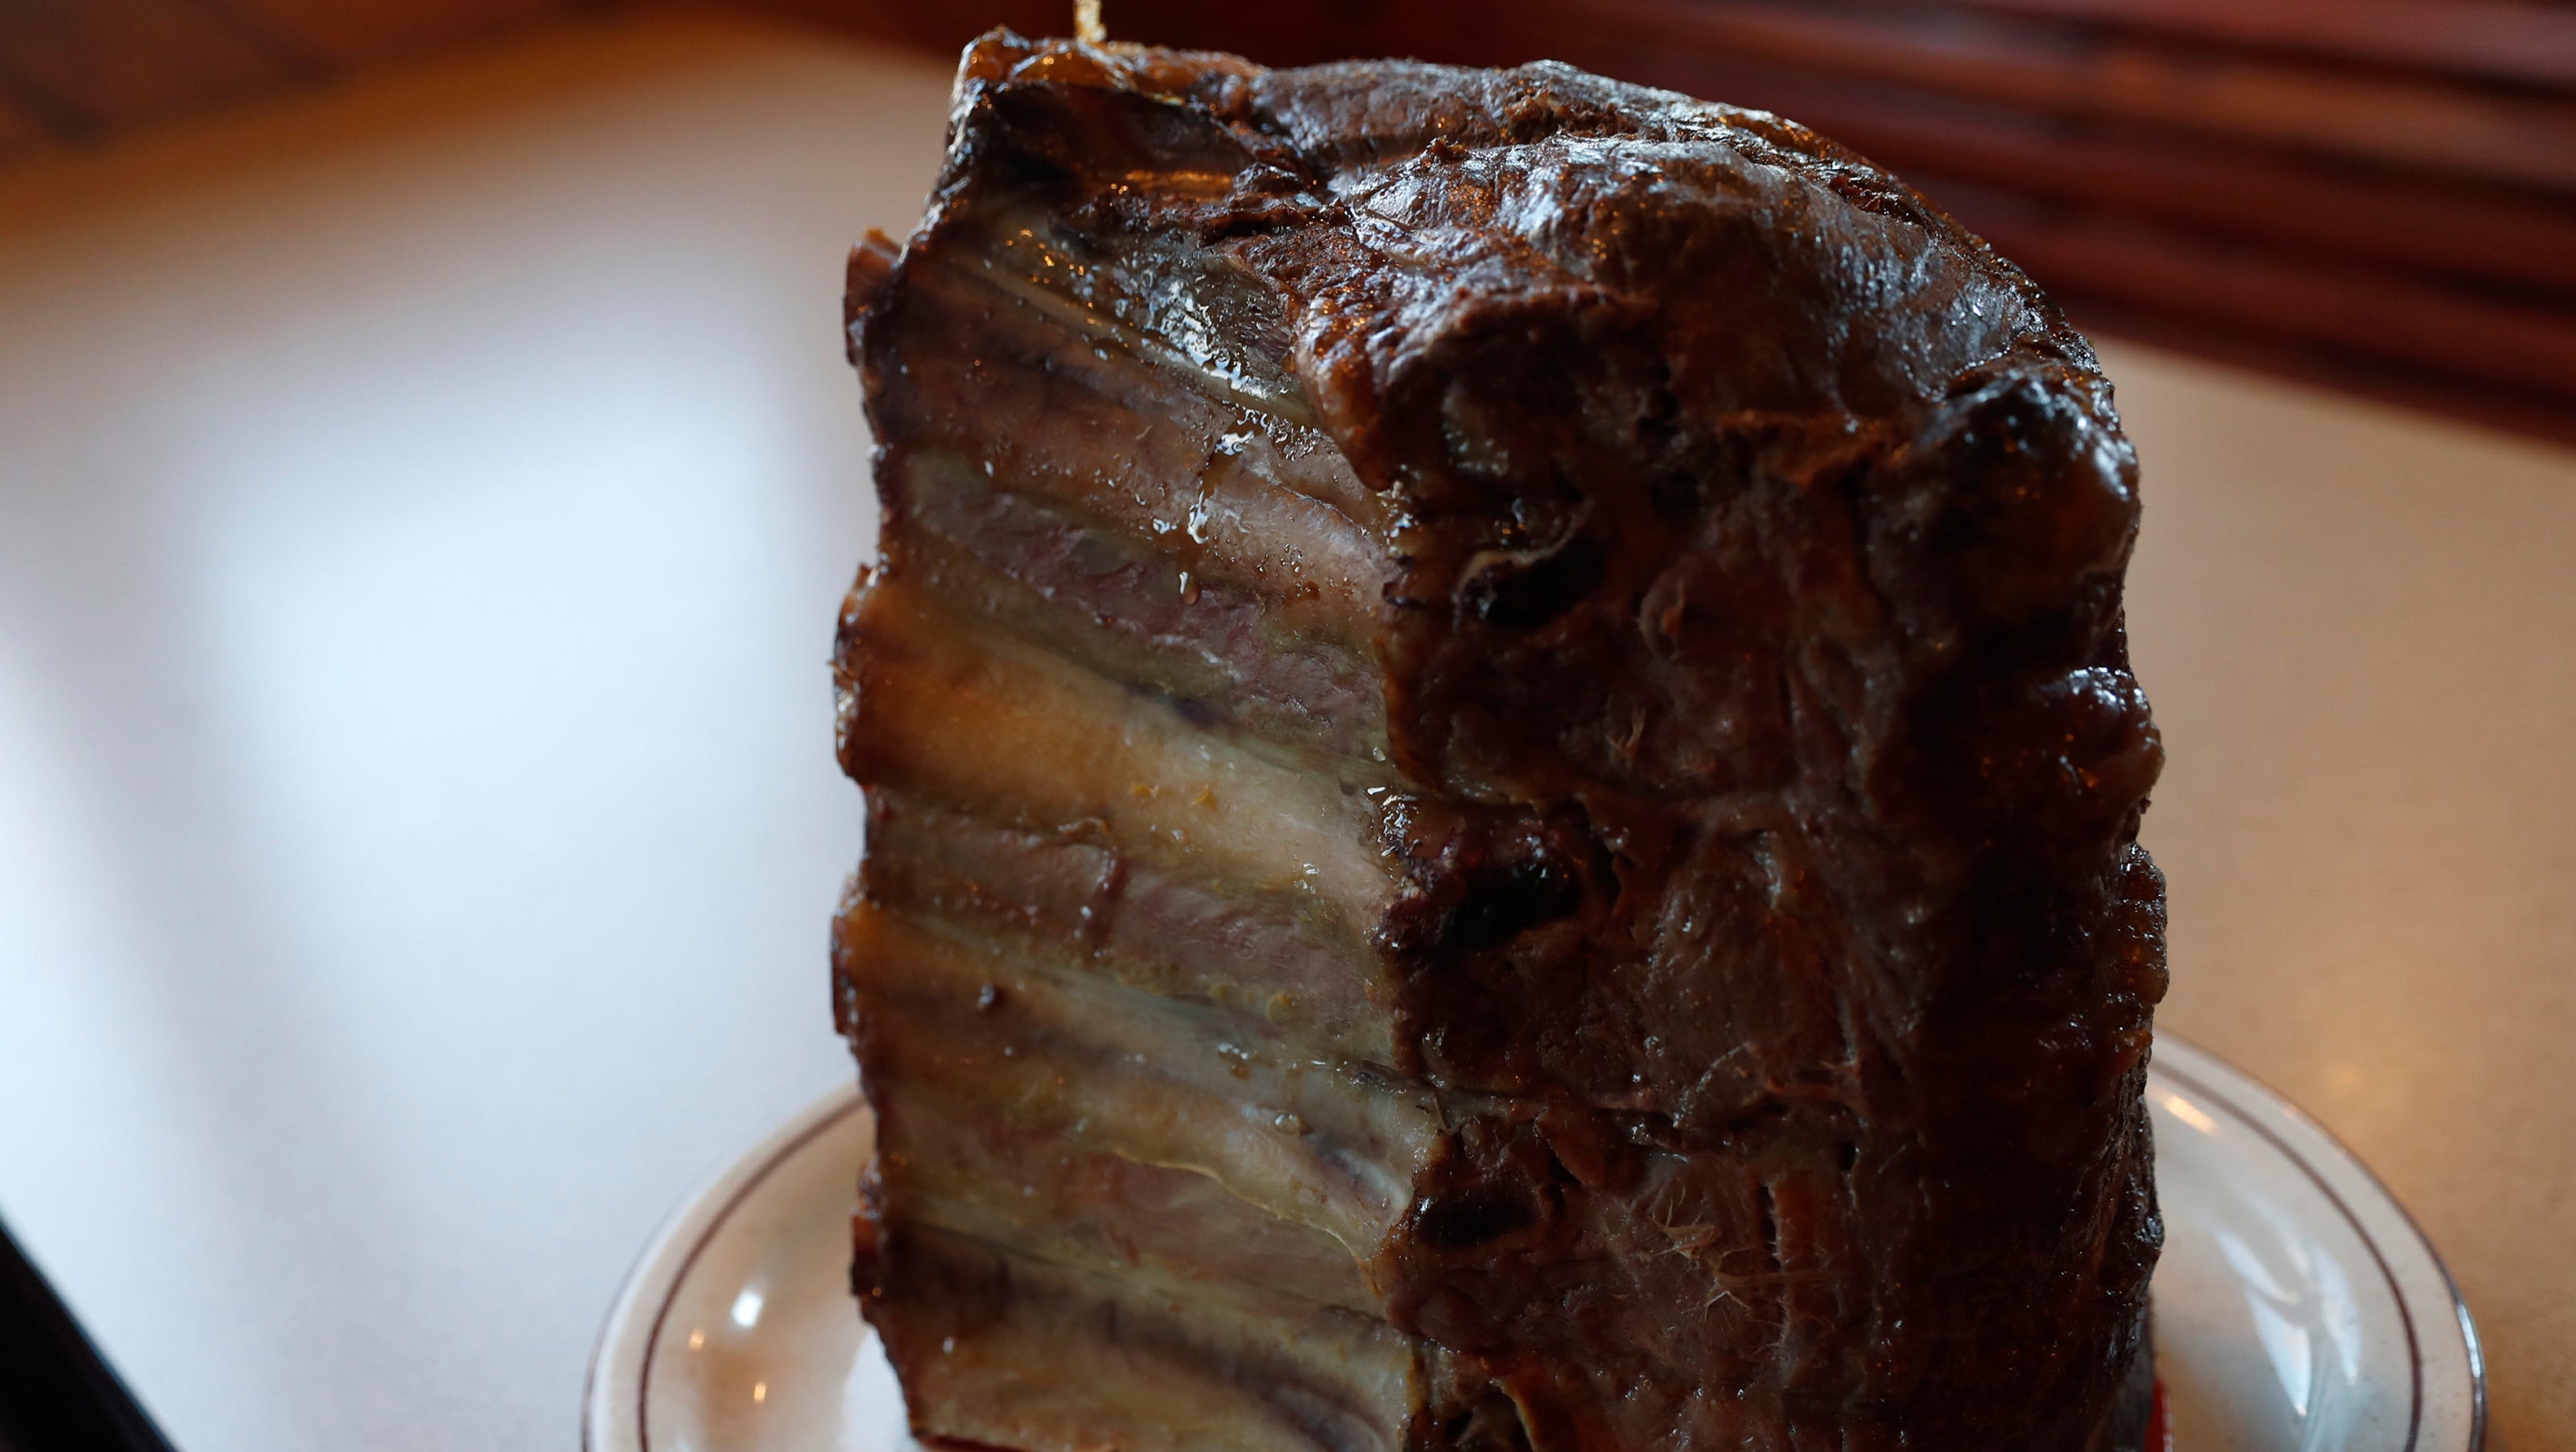 Wisconsin supper clubs: Black Otter goes big with prime rib cuts